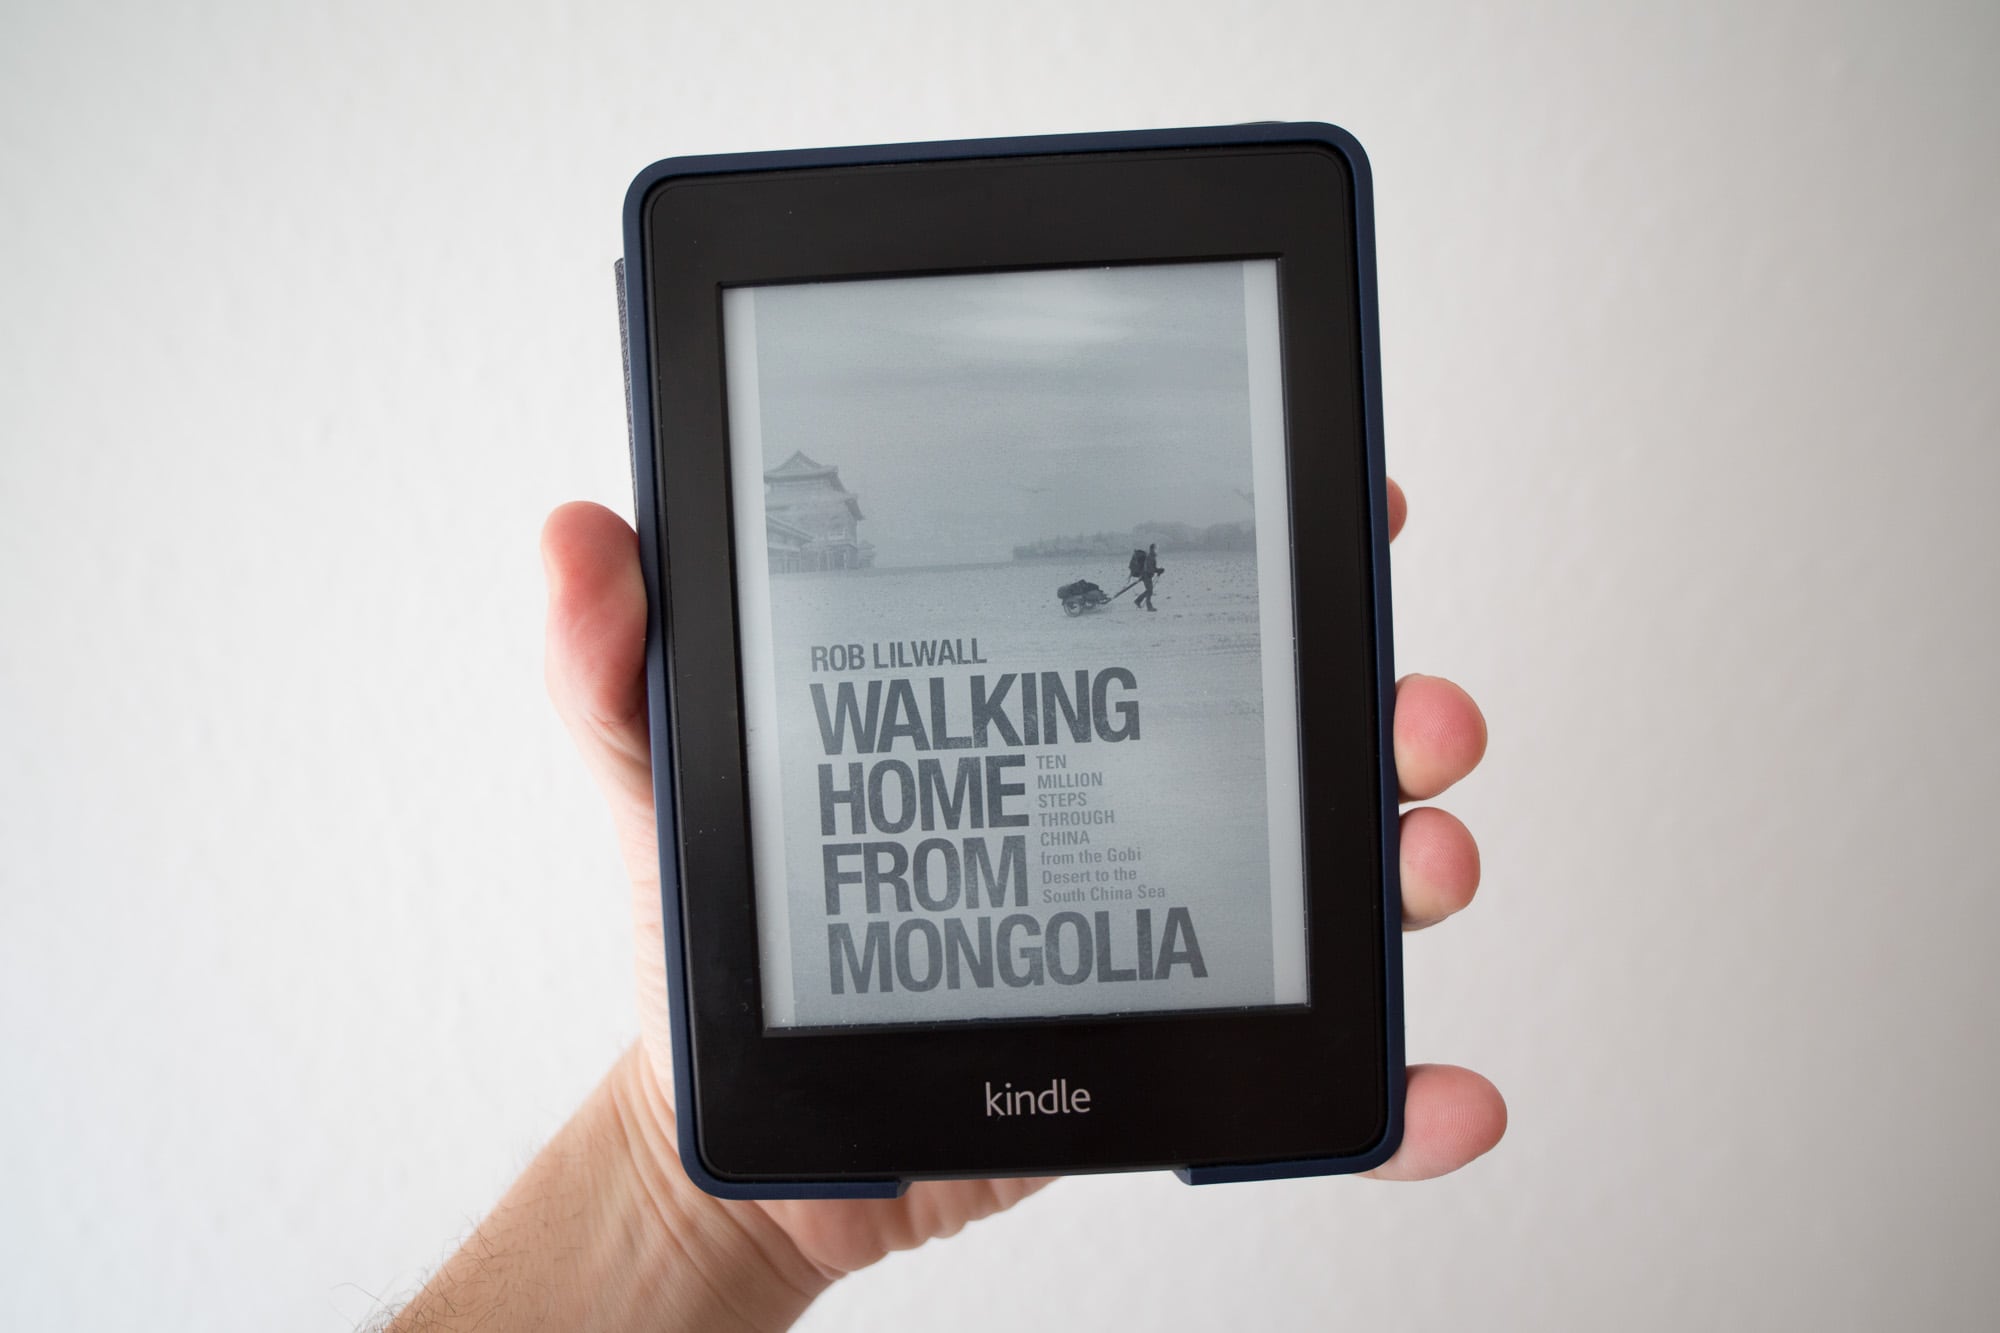 Rob Lilwall's "Walking Home From Mongolia"